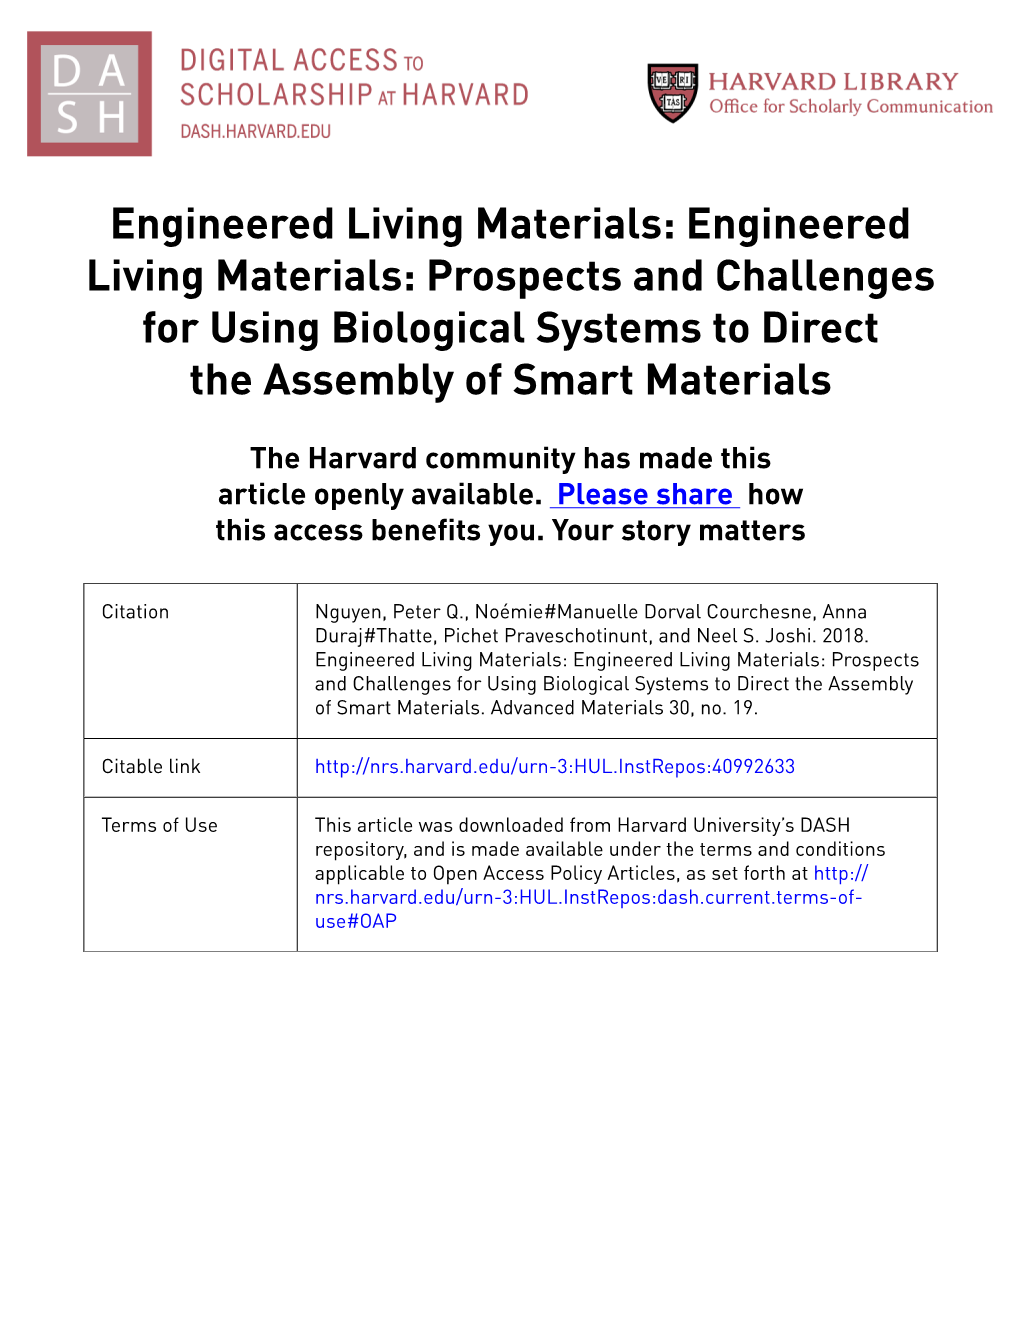 Prospects and Challenges for Using Biological Systems to Direct the Assembly of Smart Materials